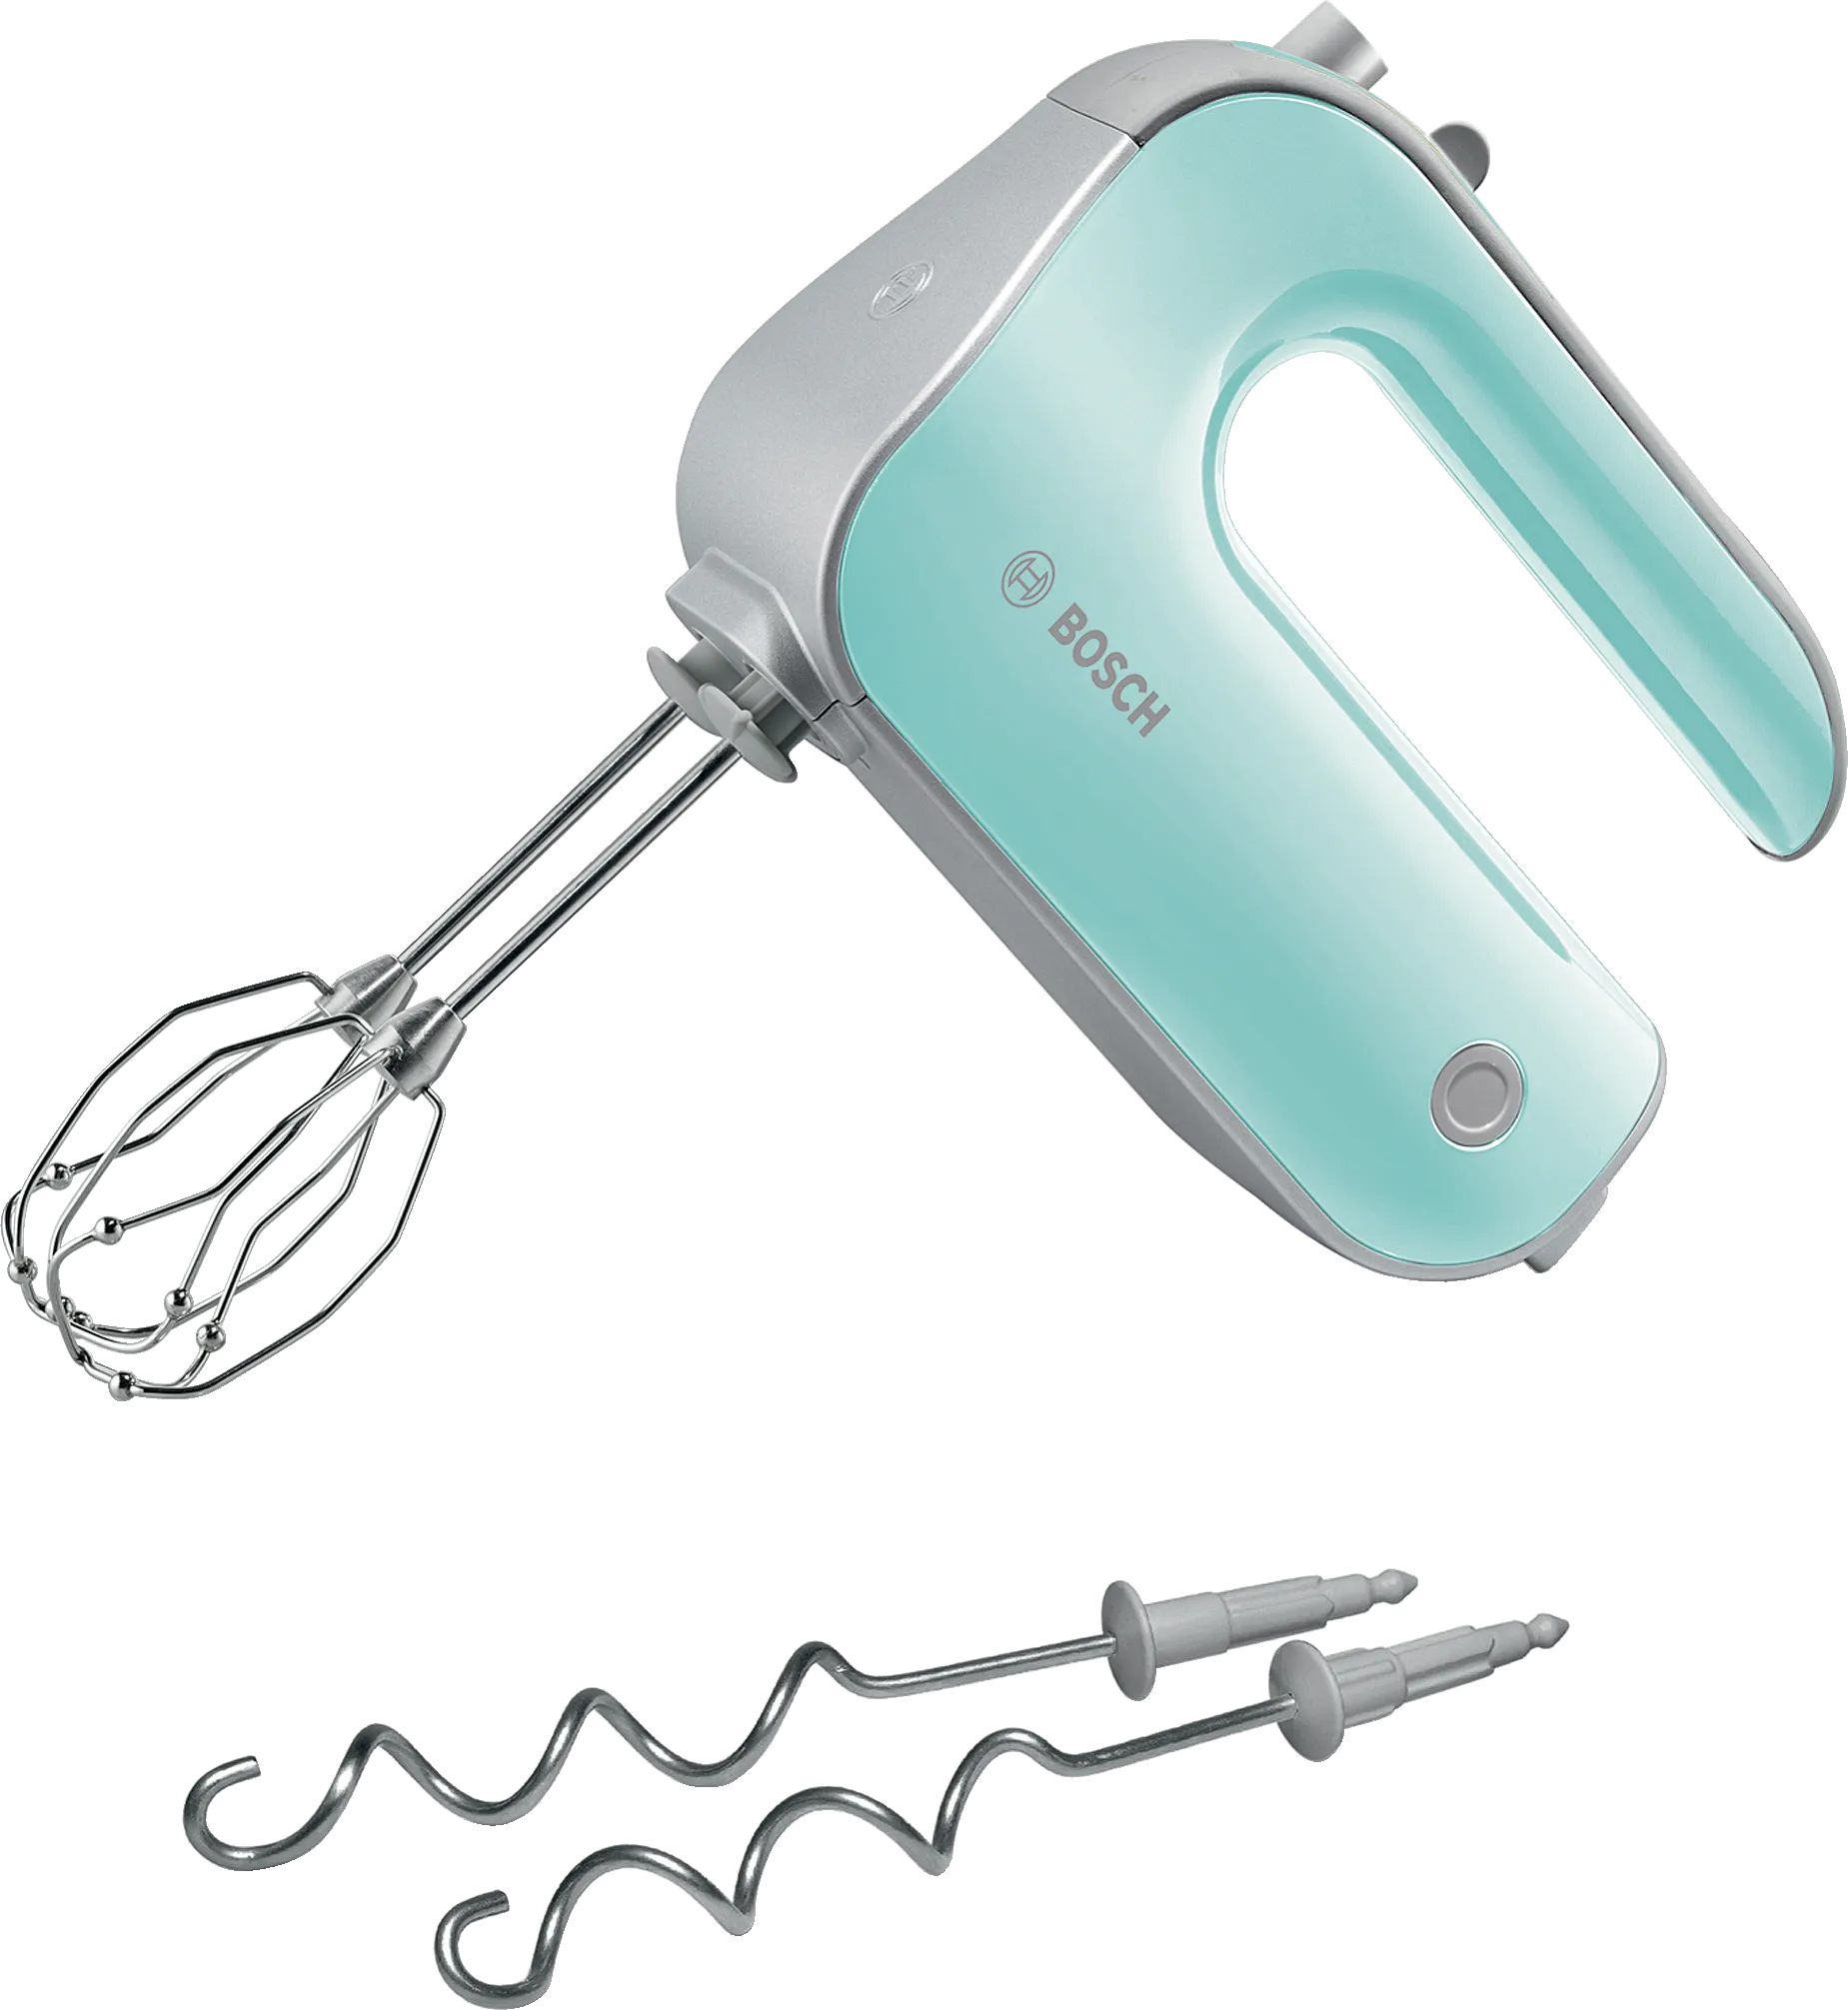 Hand mixer Styline Colour 500 W Turquoise, Silver 